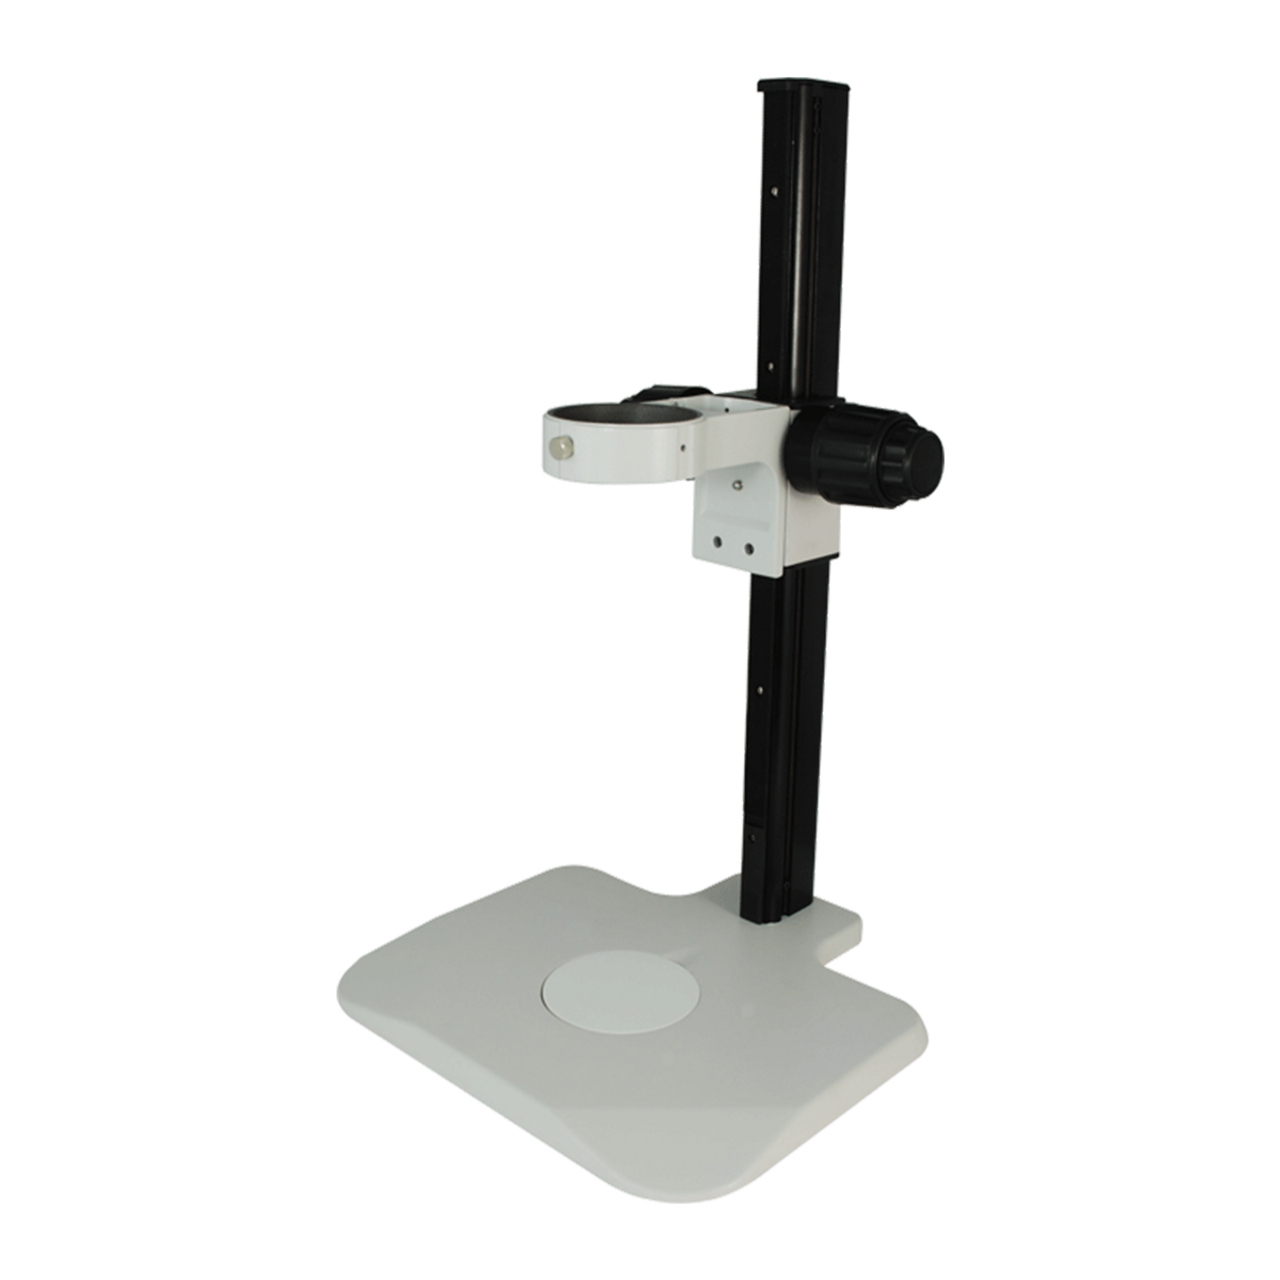 Munday Microscope Track Stand, 76mm Fine Focus Rack, 520mm Track Length - microscopemarketplace